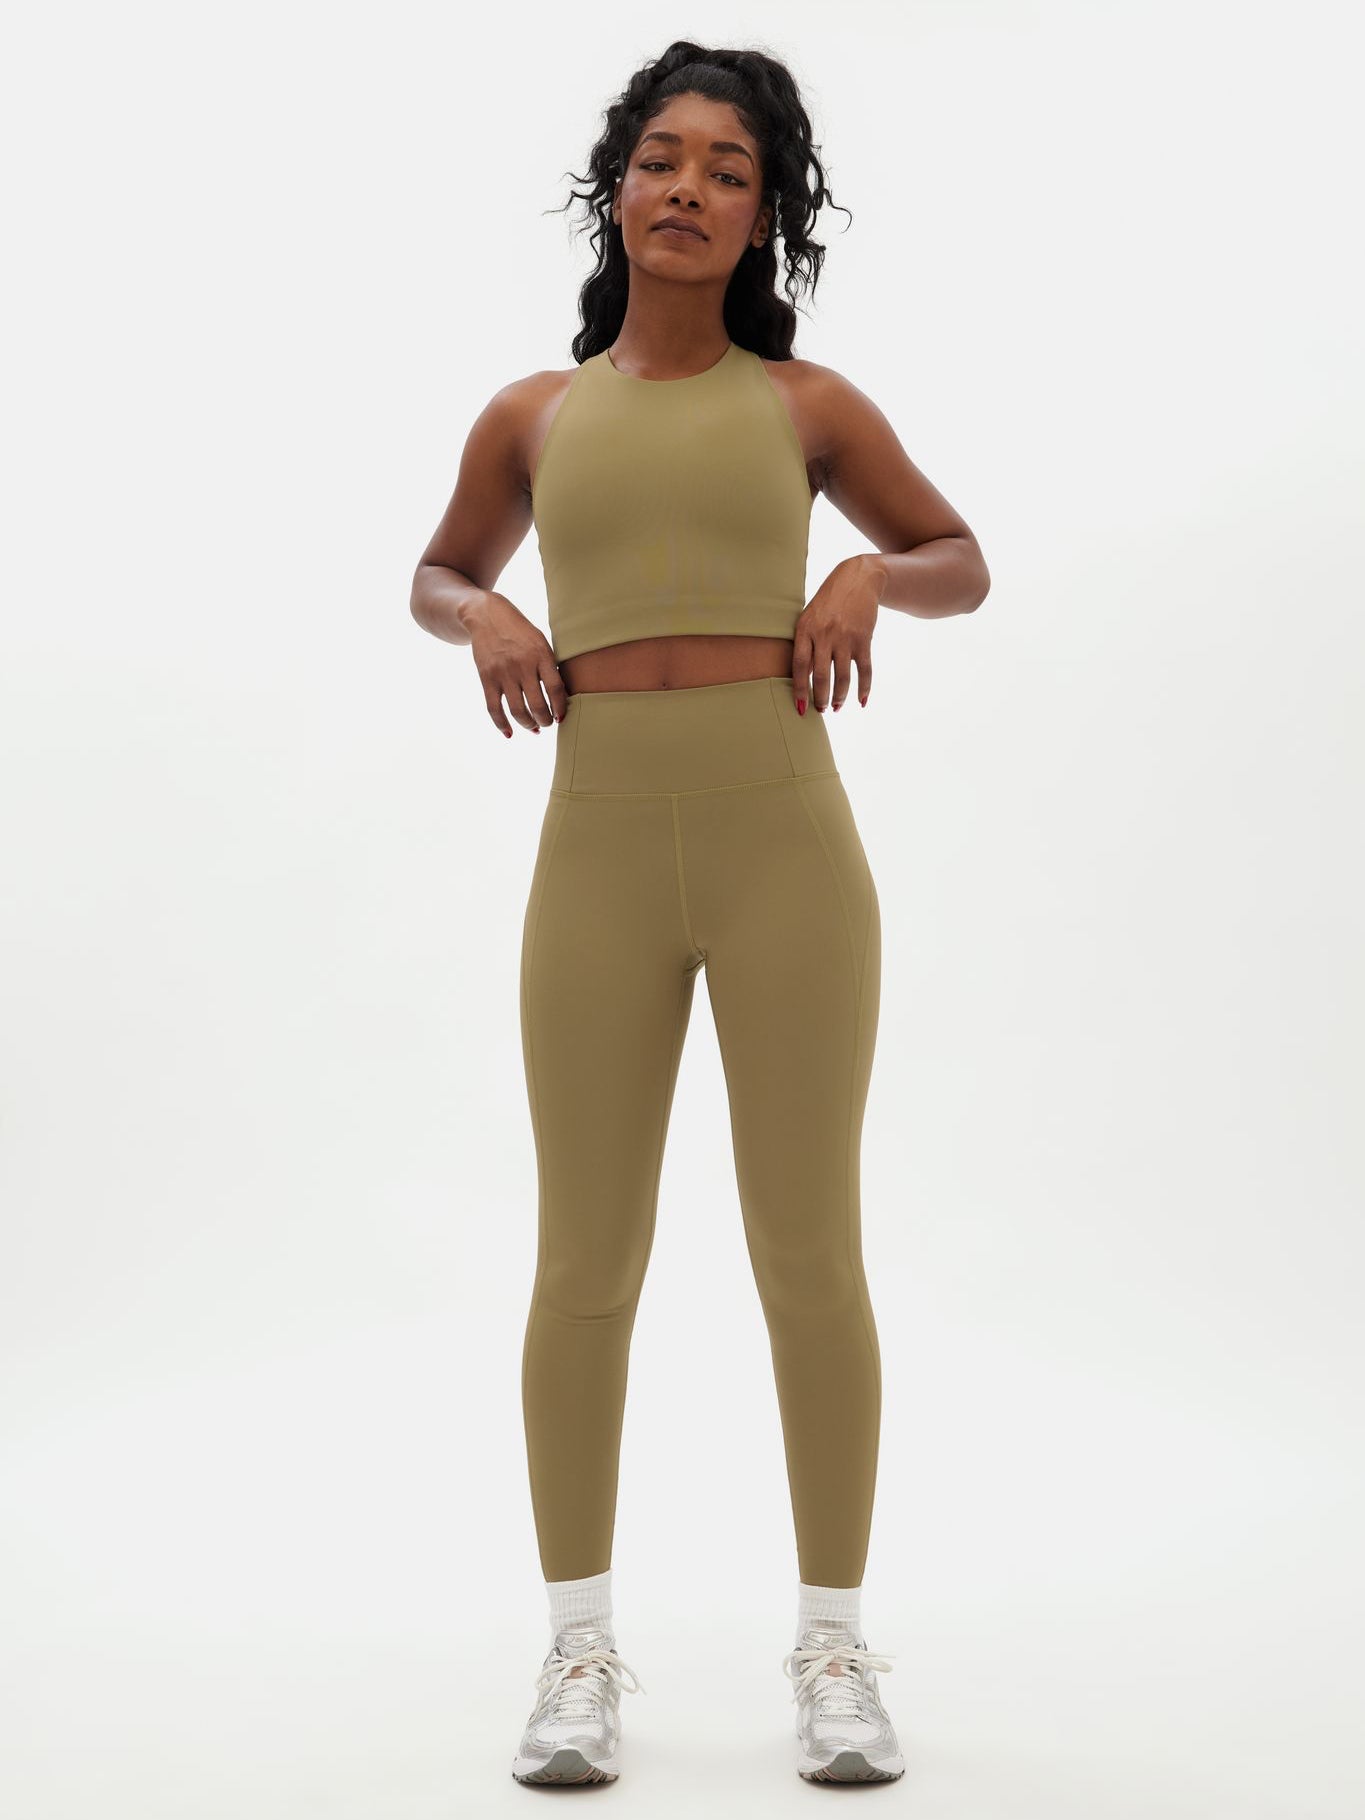 Solo 7/8 High Waisted Legging Olive